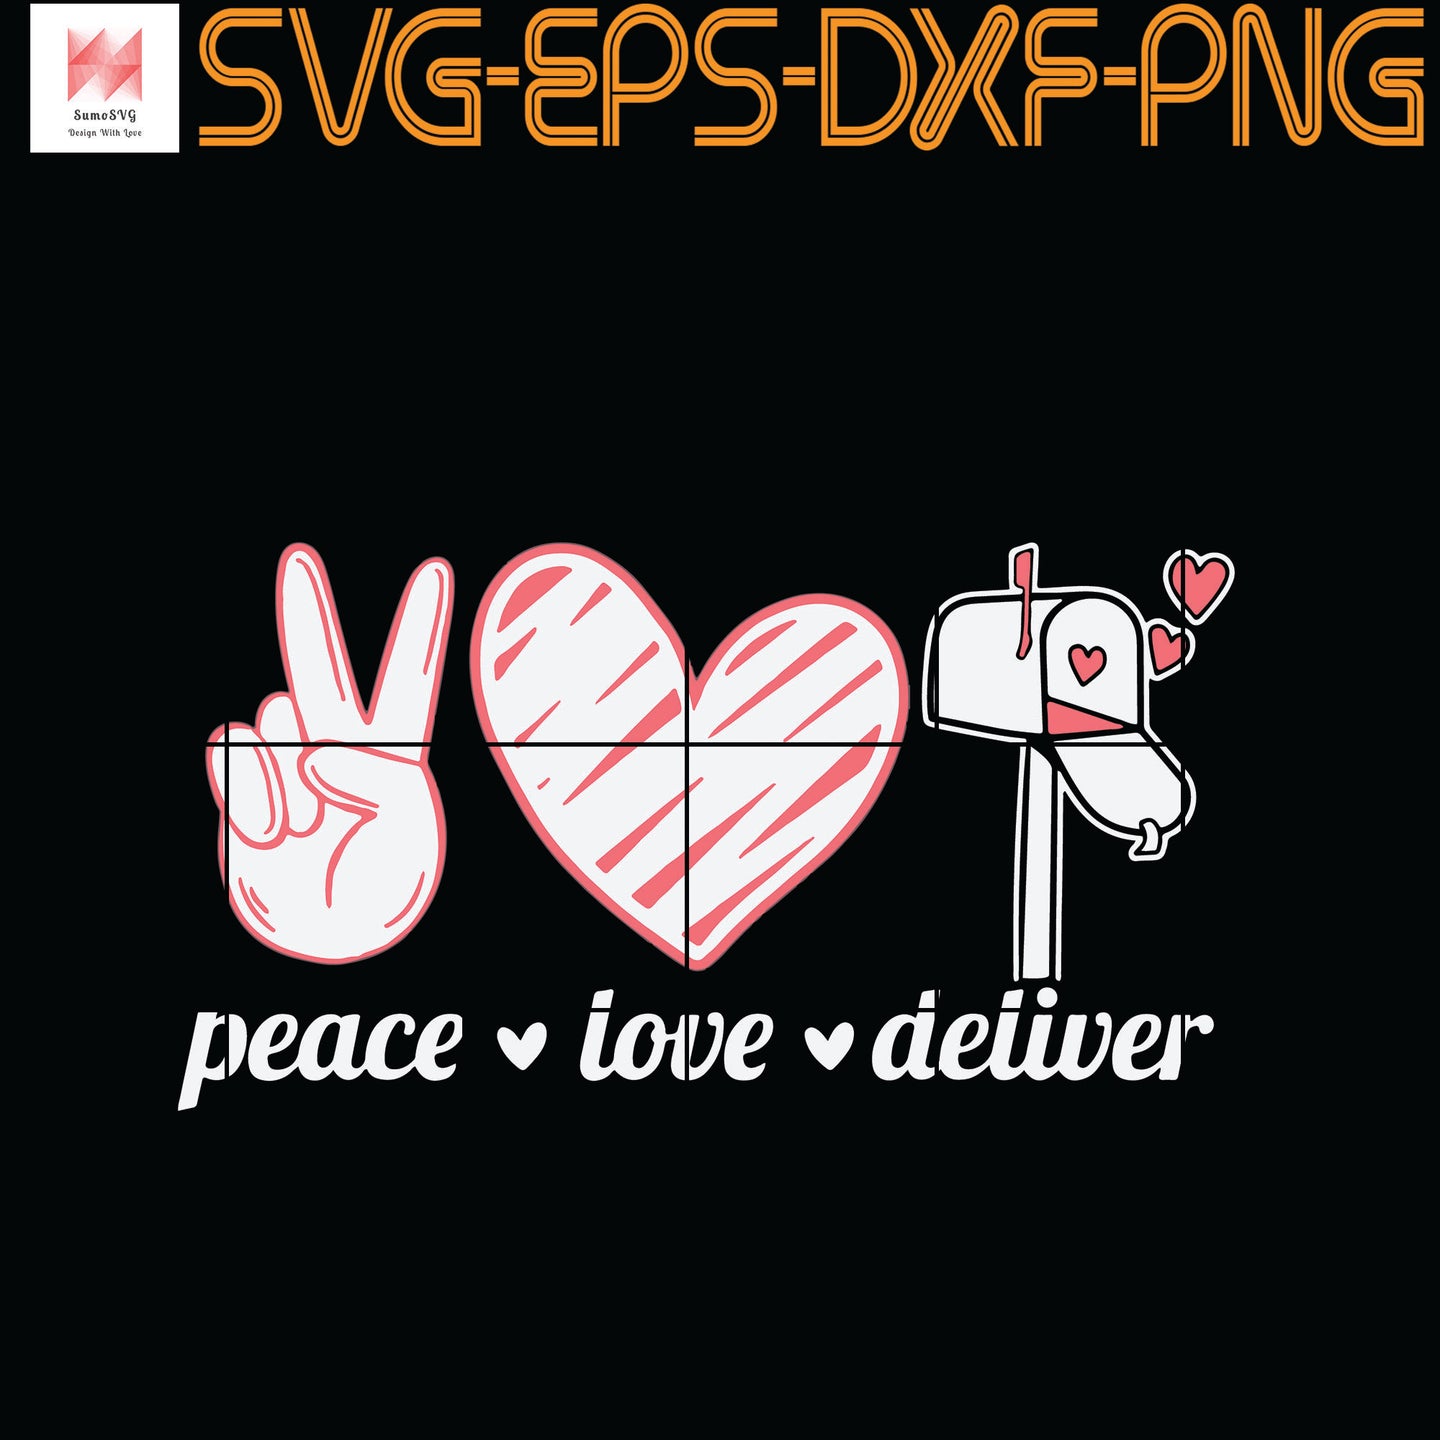 Download Peace Love Deliver Postal Worker Ballot Voting By Mail Quotes Svg Ep Sumosvg